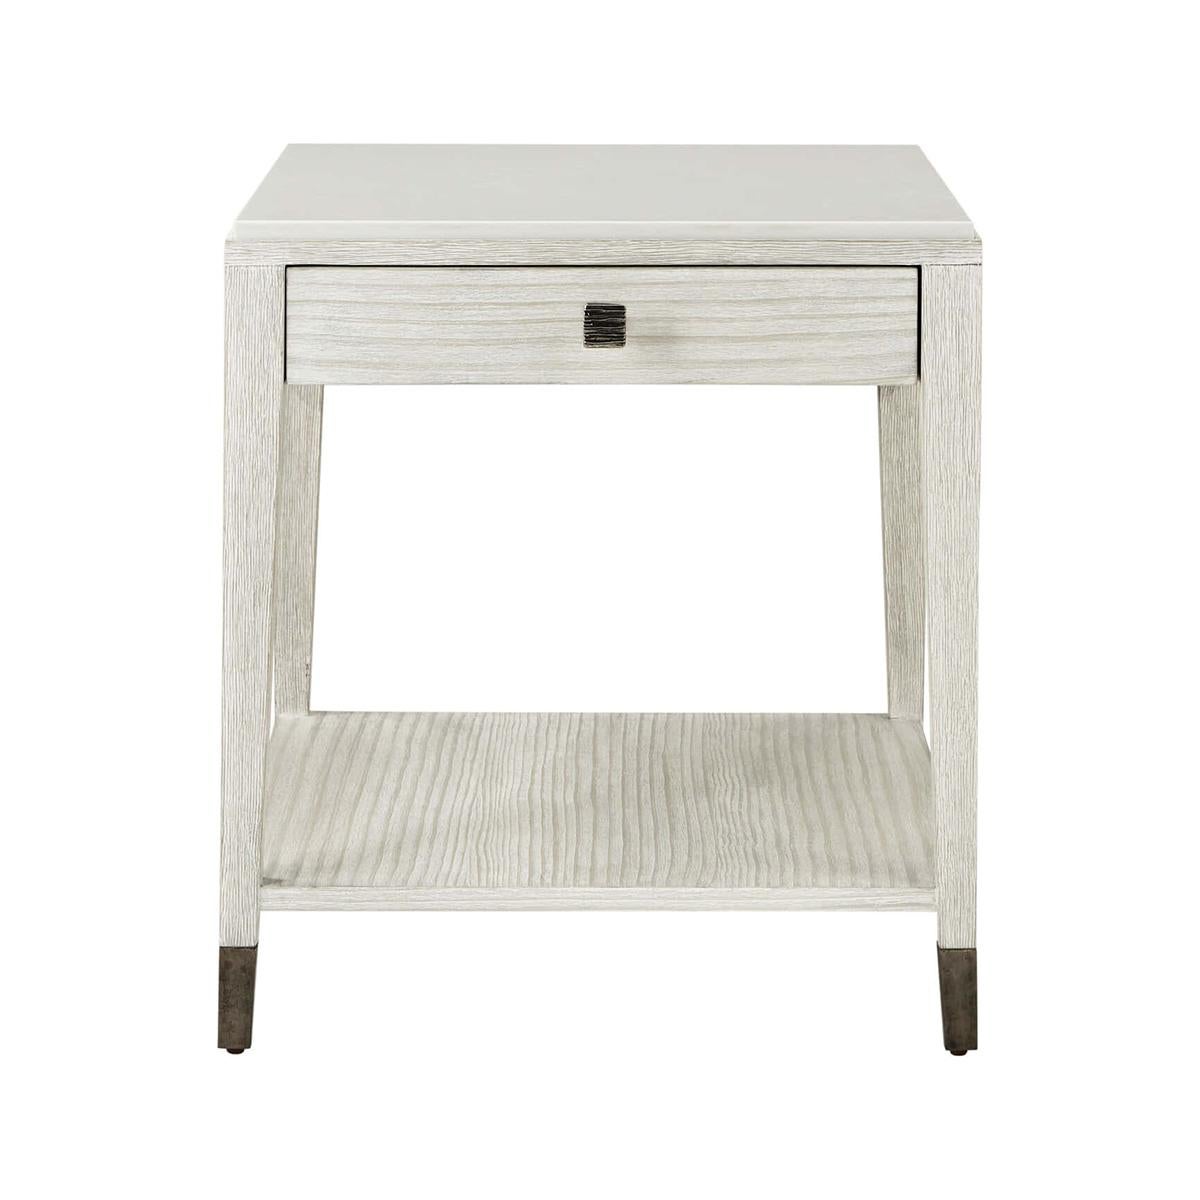 Coastal painted stone top side table, with a chalky white limestone top and base crafted from wire-brushed cerused pine in our new Sea Salt finish. This side table contains a single drawer, a lower storage shelf, and an organic ribbed metal knob